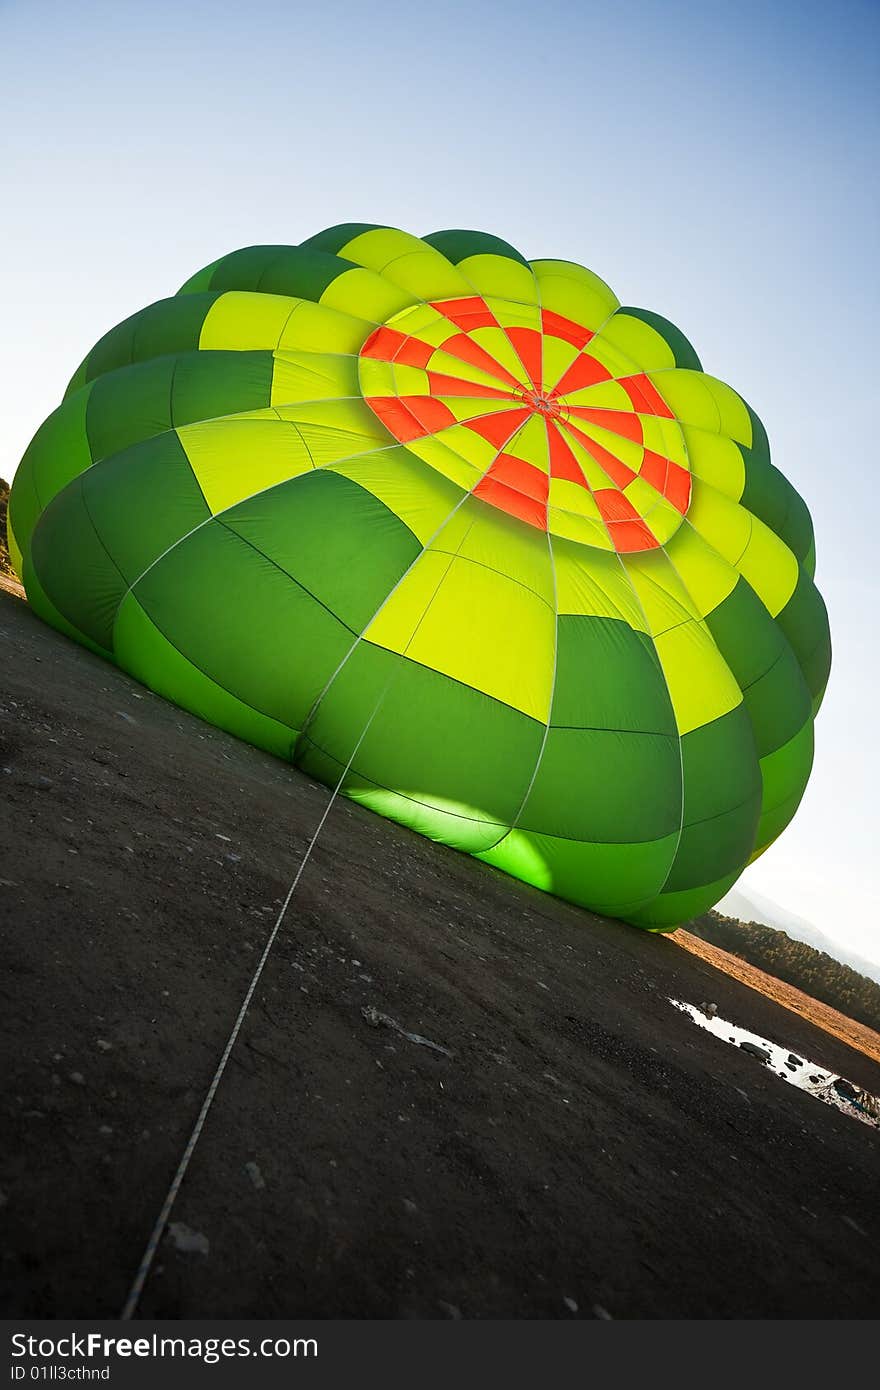 Hot air balloon being inflated. Hot air balloon being inflated